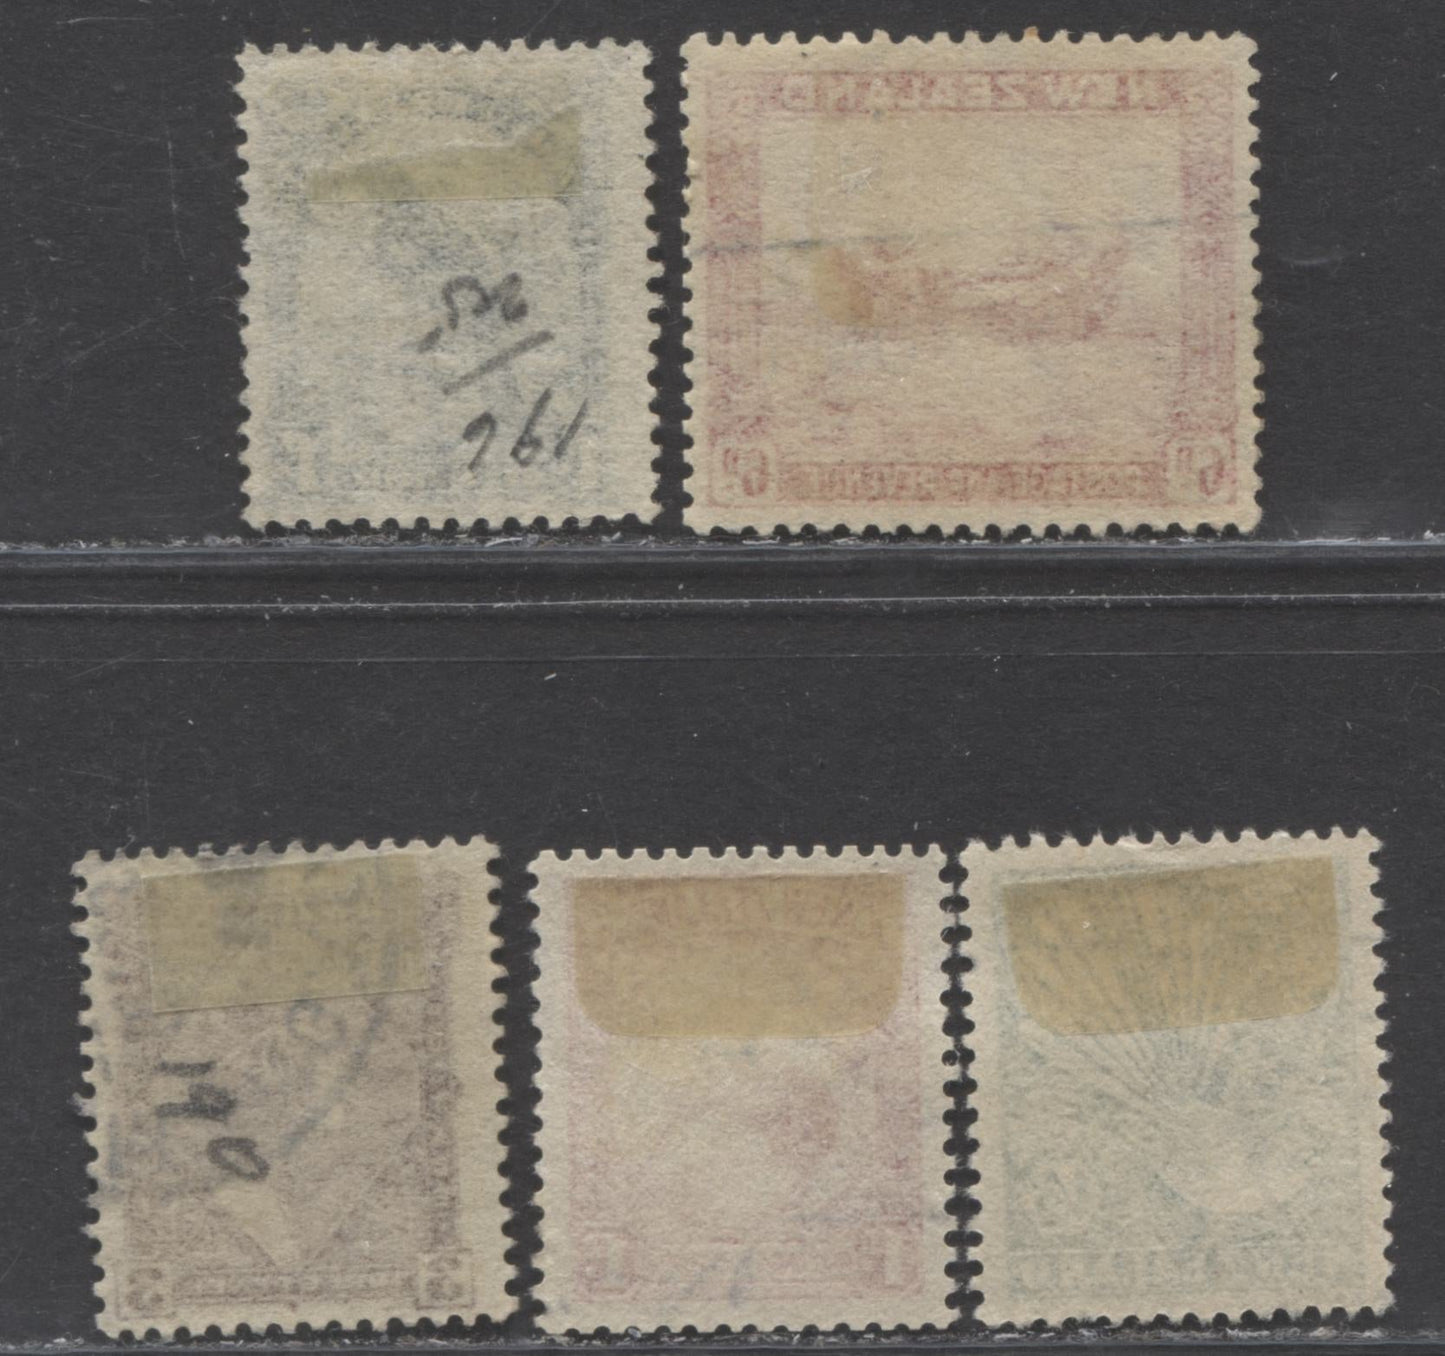 Lot 137 New Zealand SC#204/245 1936-1942 Pictorial Definitives With Multiple Watermark, A F/VF Used Range Of Singles, 2017 Scott Cat. $19.4 USD, Click on Listing to See ALL Pictures